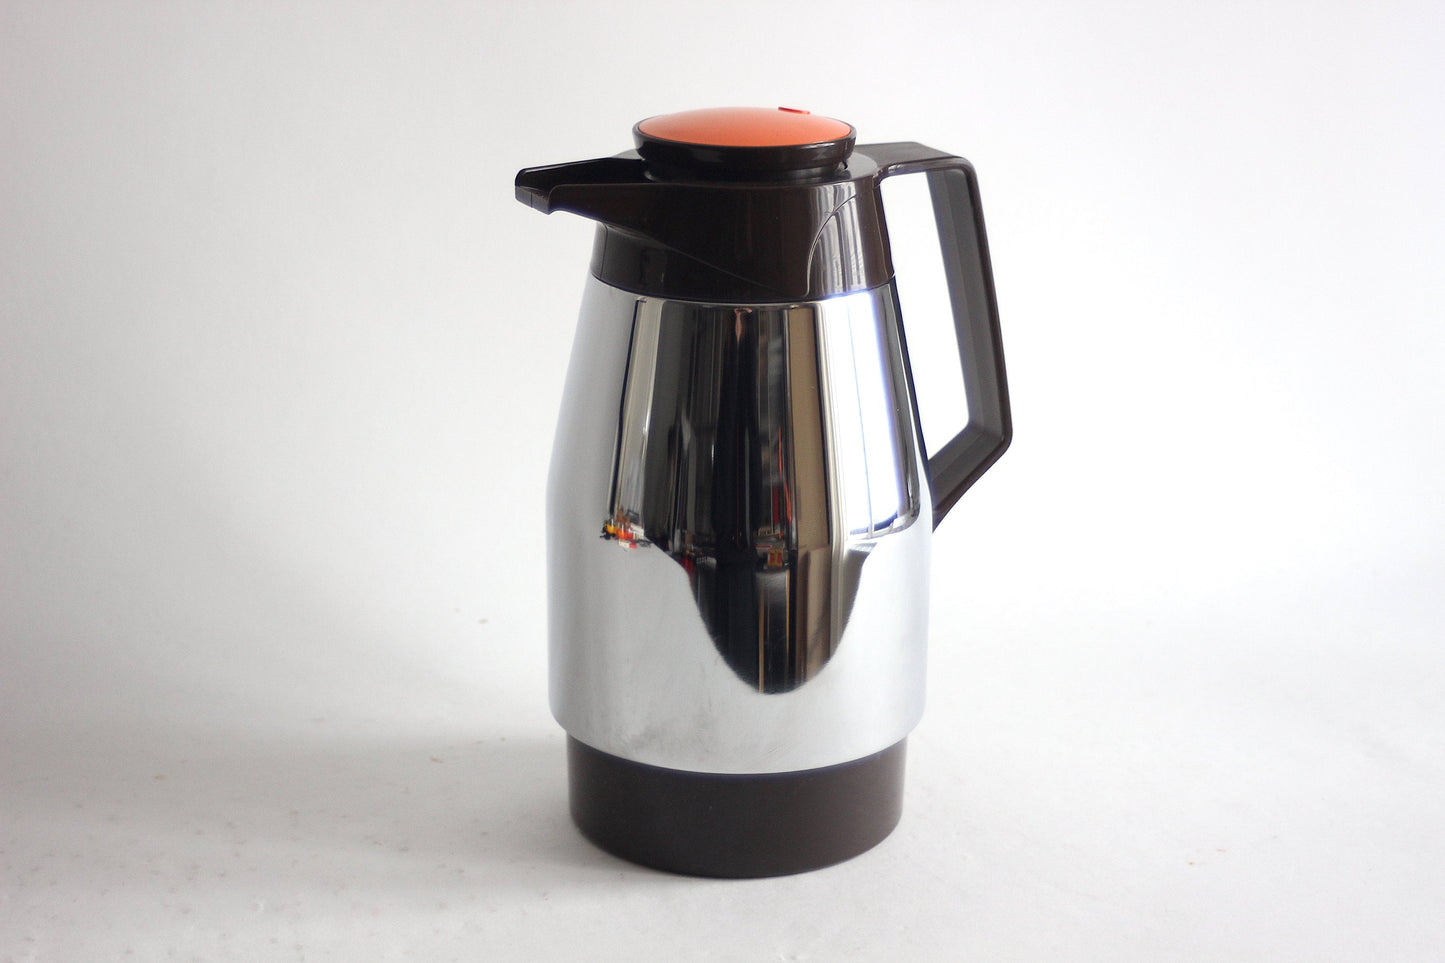 DR ZIMMERMANN Vintage 70s thermos. Knox and Orange thermos bottle. Space age design. Made in West Germany.